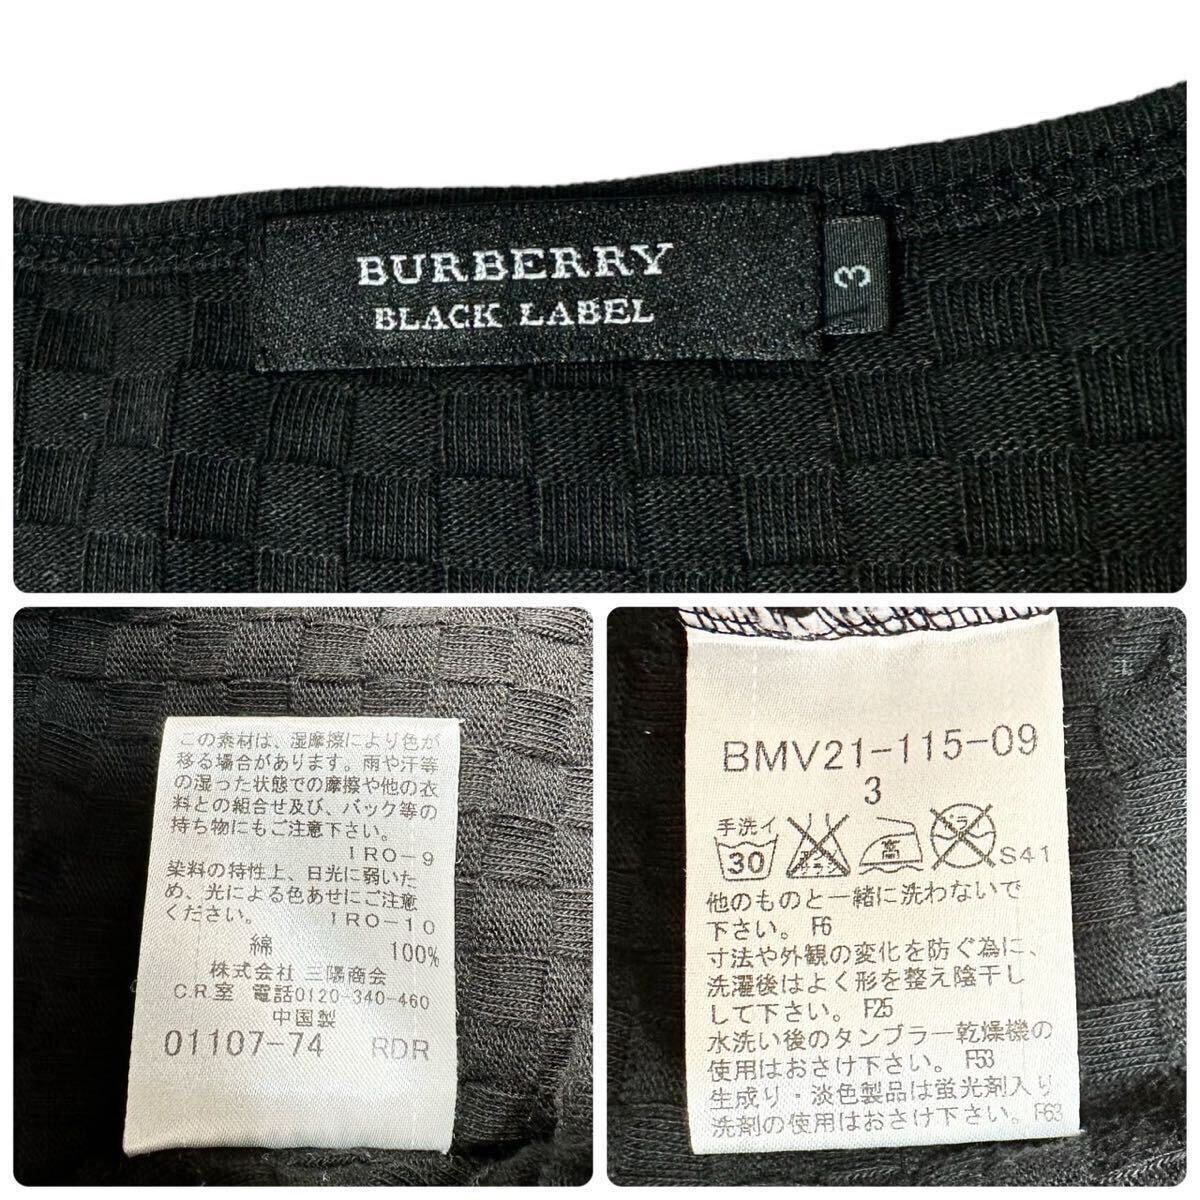 [ rare waffle ] finest quality beautiful goods * BURBERRY BLACK LABEL Burberry Black Label * cut and sewn long T long t shirt hose embroidery size L